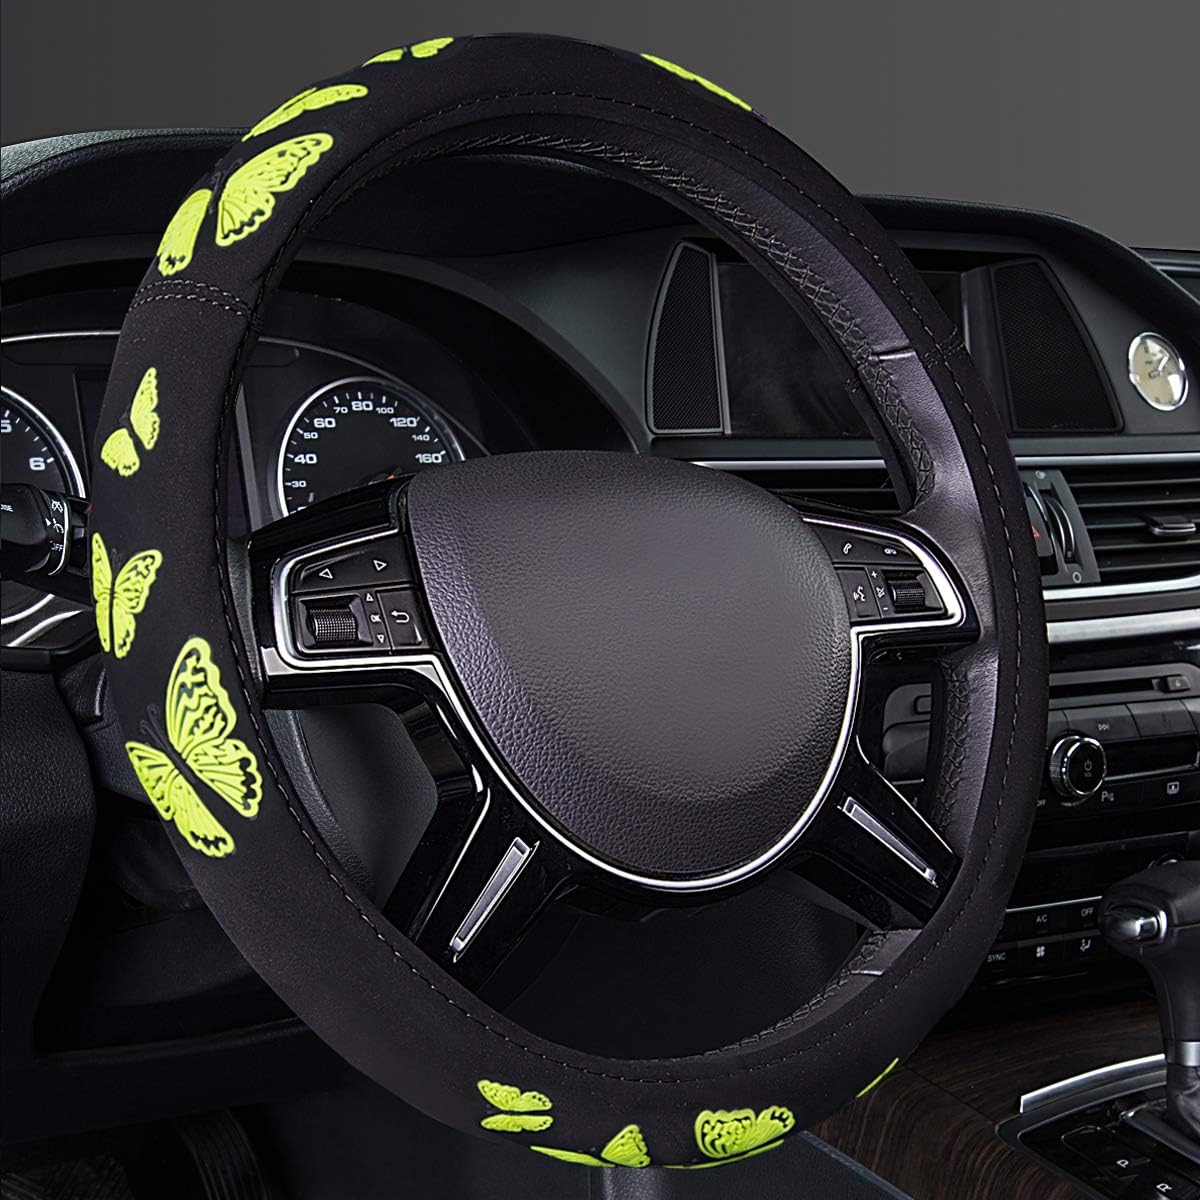 Car Pass Purple Butterfly Steering Wheel Cover, Universal Fit for Suvs, Trucks, Sedans, Cars for Cute Women Girly (Black and Purple)